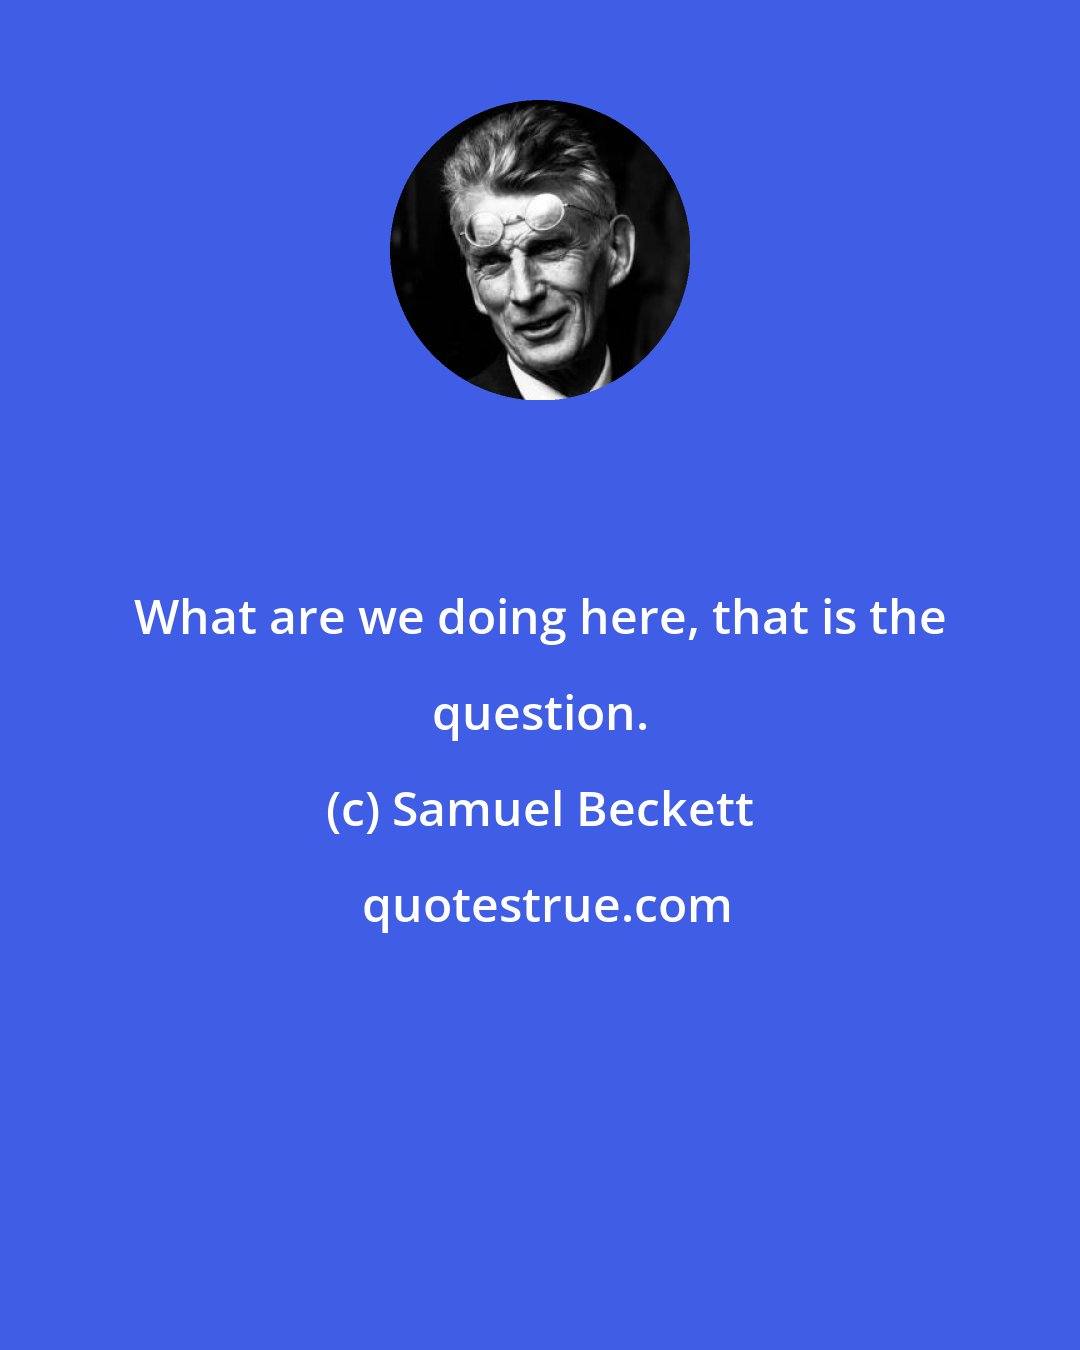 Samuel Beckett: What are we doing here, that is the question.